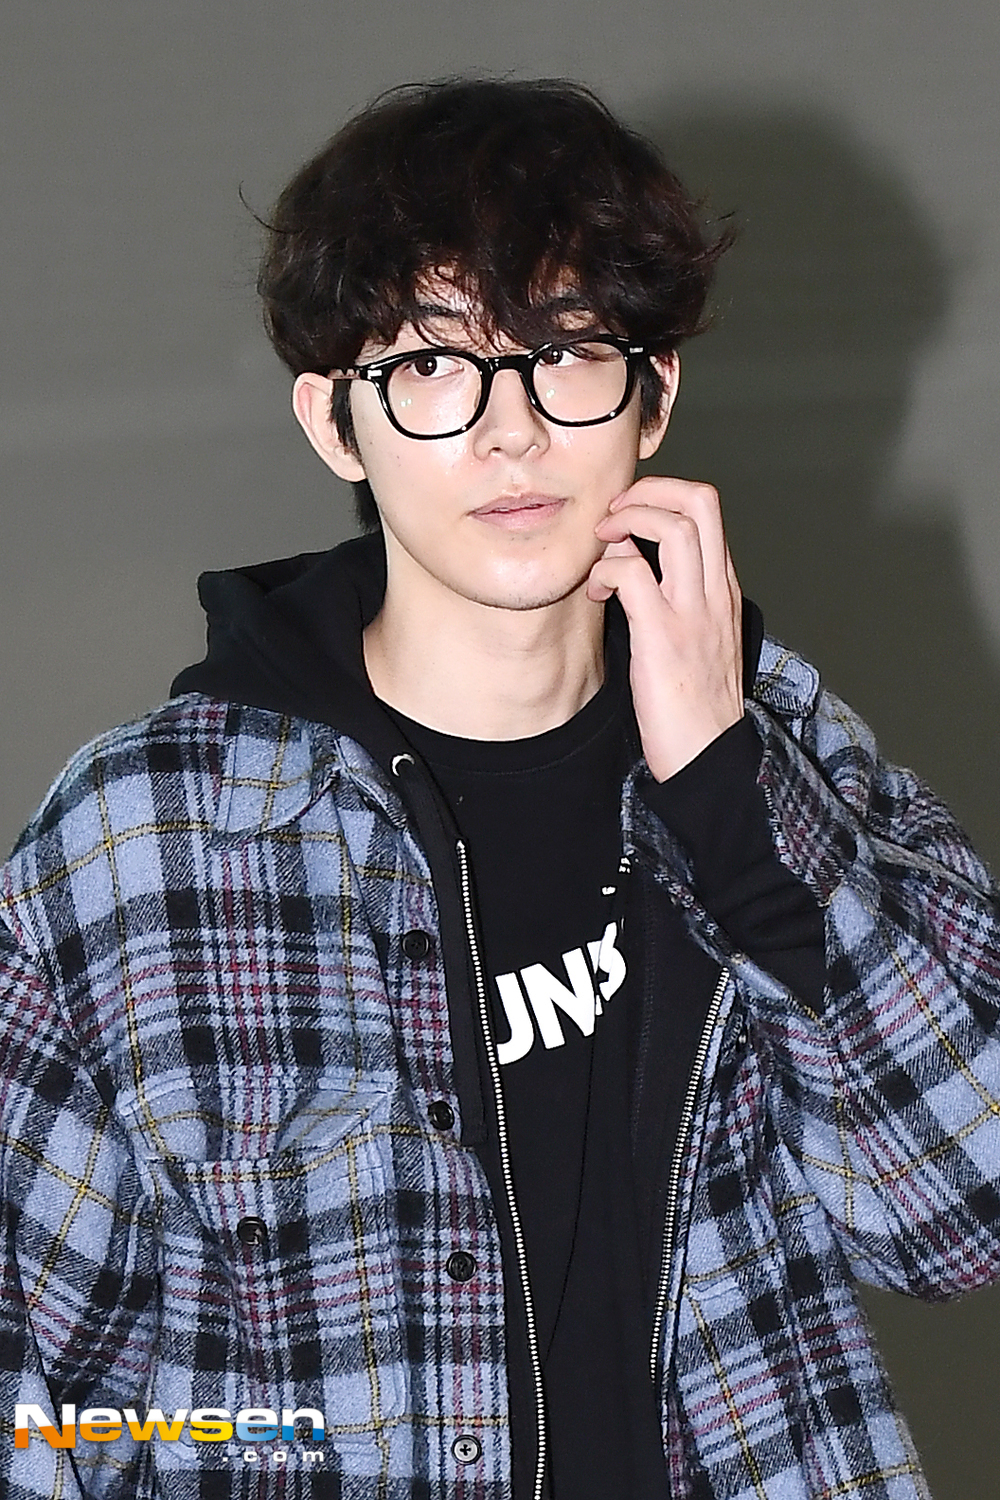 Actor Nam Joo-hyuk left for Bangkok, Thailand, on the morning of March 1st, to attend the 2019 Nam Joo-hyuk fan meeting Bangkok (2019 NAM JOO HYUK FANMEETING IN BANGKOK) schedule through Incheon International Airport in Unseo-dong, Jung-gu, Incheon.Actor Nam Joo-hyuk is leaving for Bangkok, Thailand.exponential earthquake